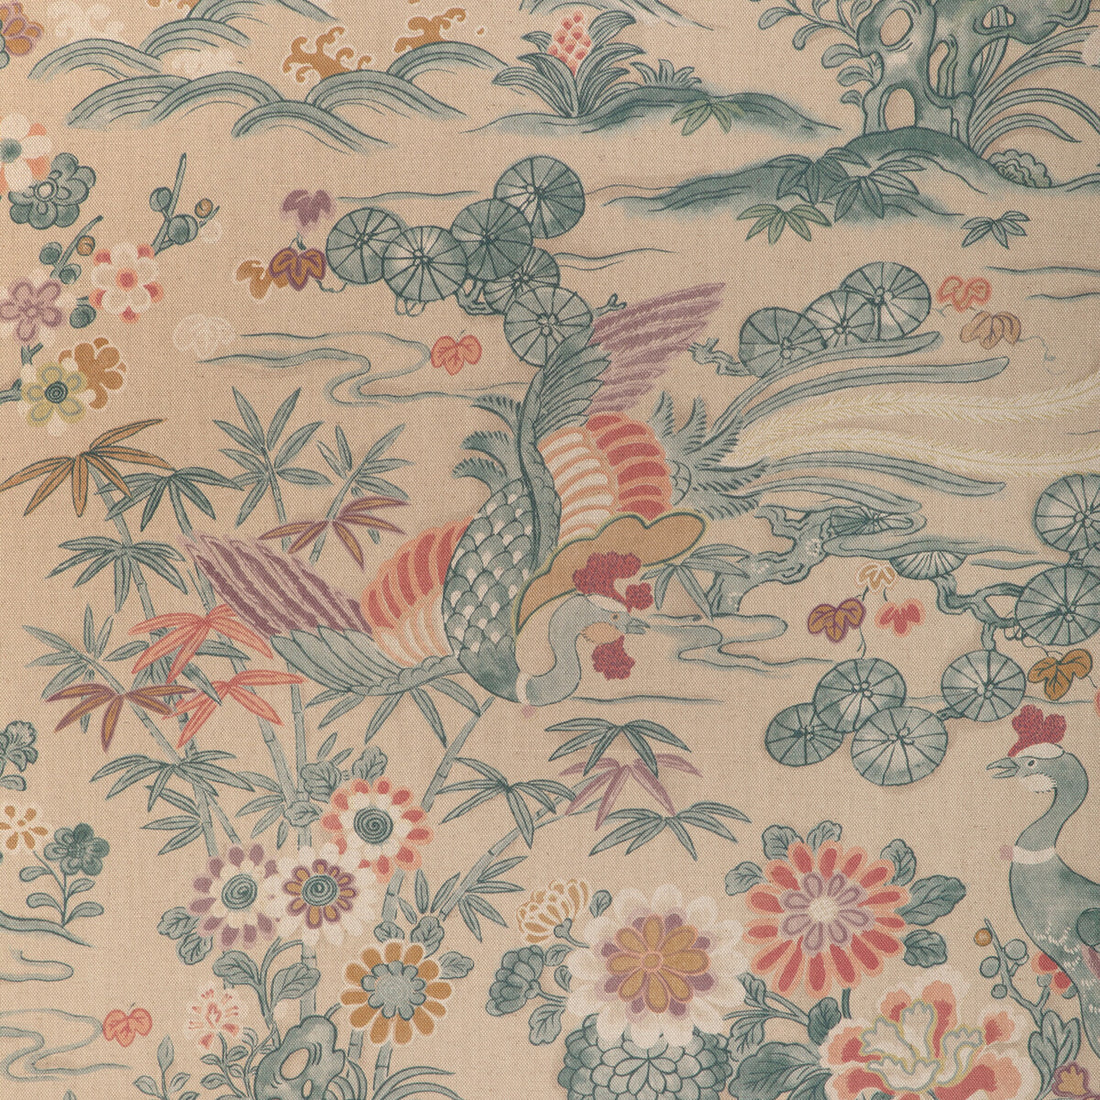 Sakura Print fabric in shore color - pattern 2023139.1613.0 - by Lee Jofa in the Garden Walk collection